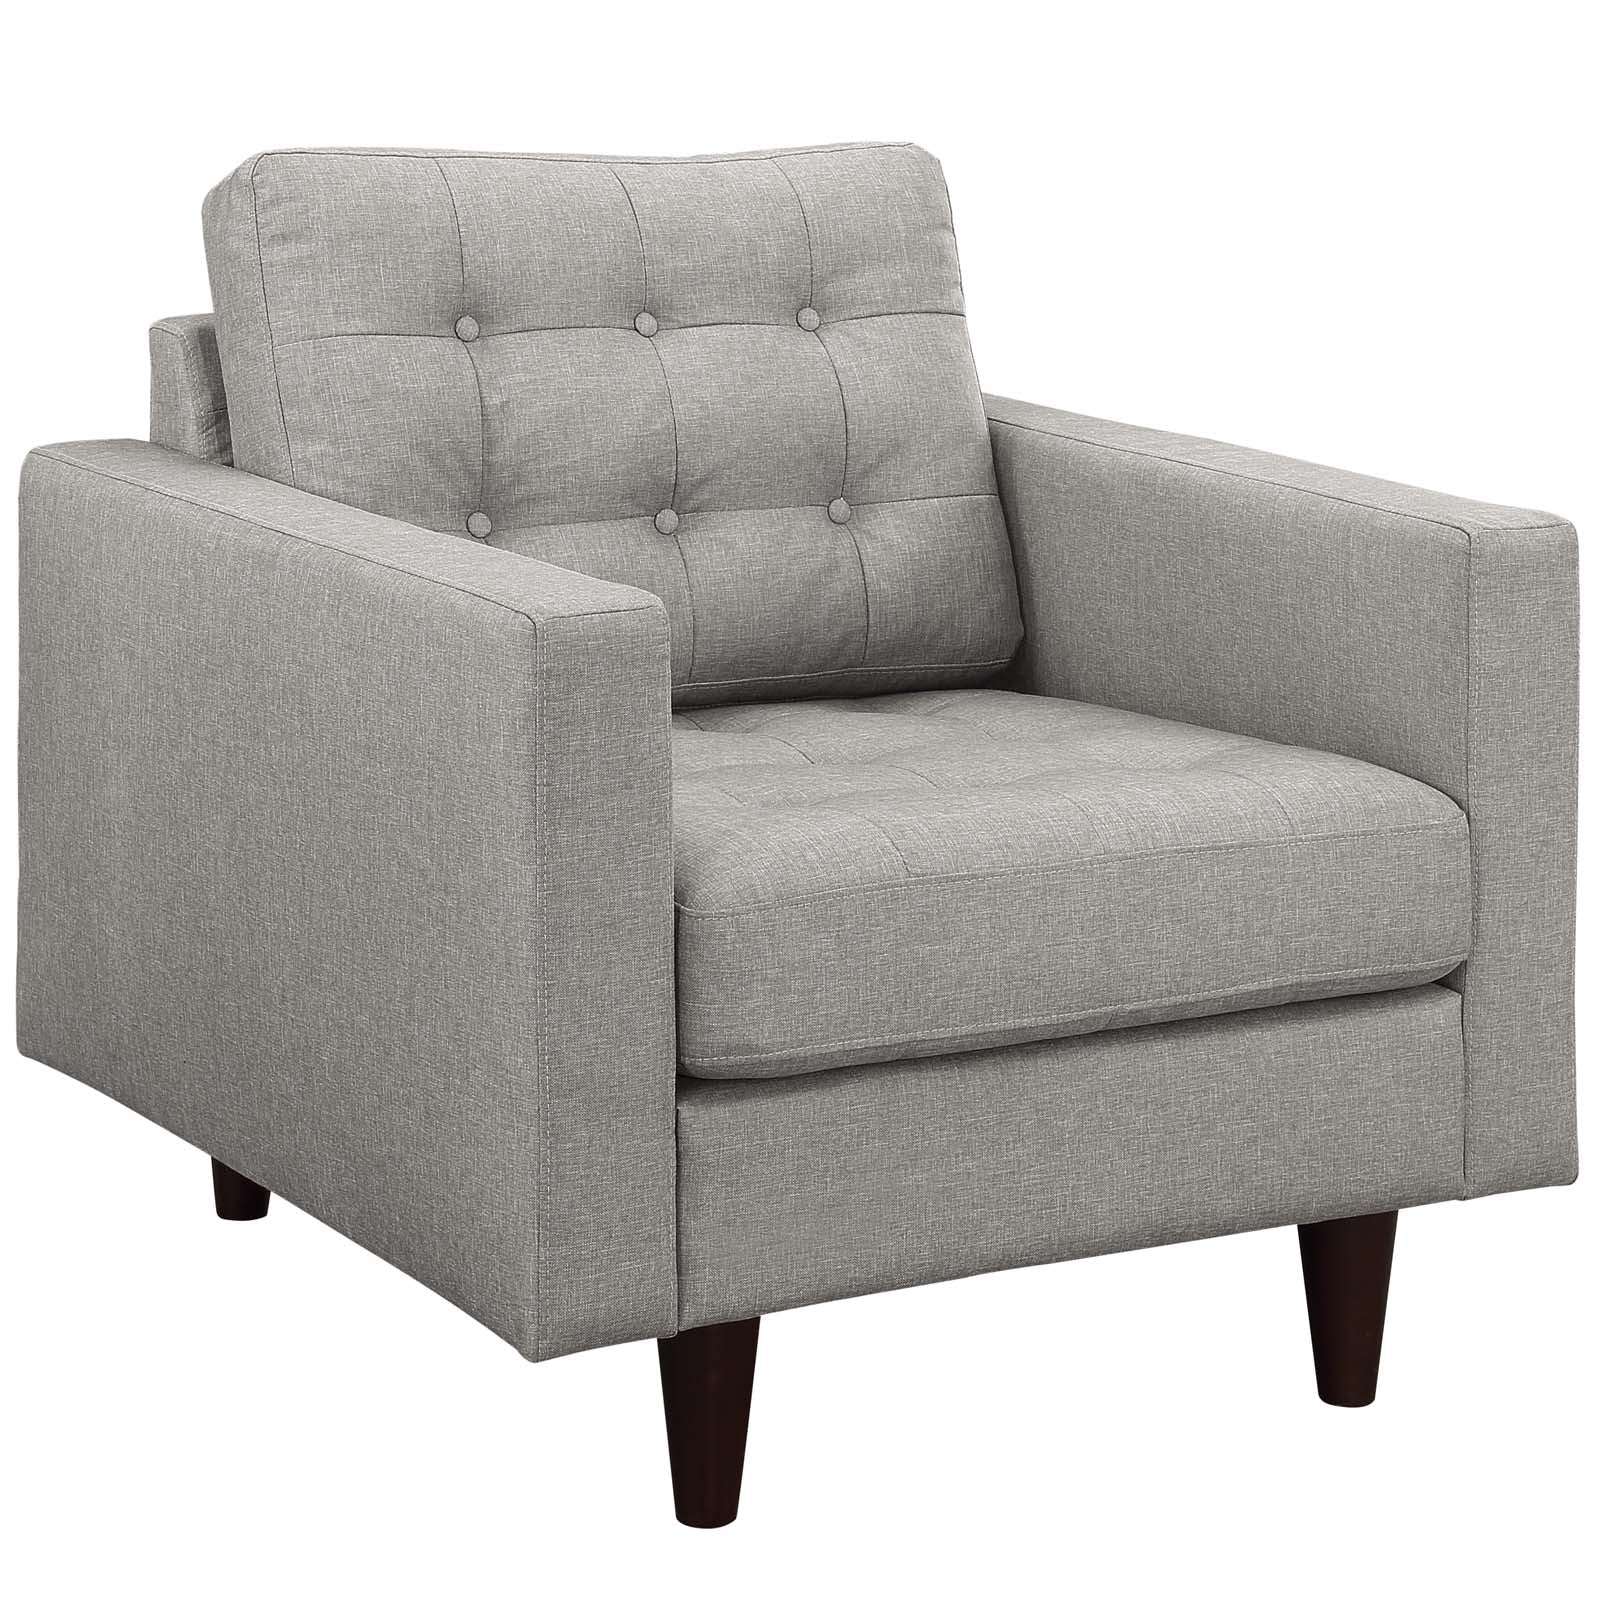 Modway Living Room Sets - Empress Sofa, Loveseat and Armchair ( Set Of 3 ) Light Gray